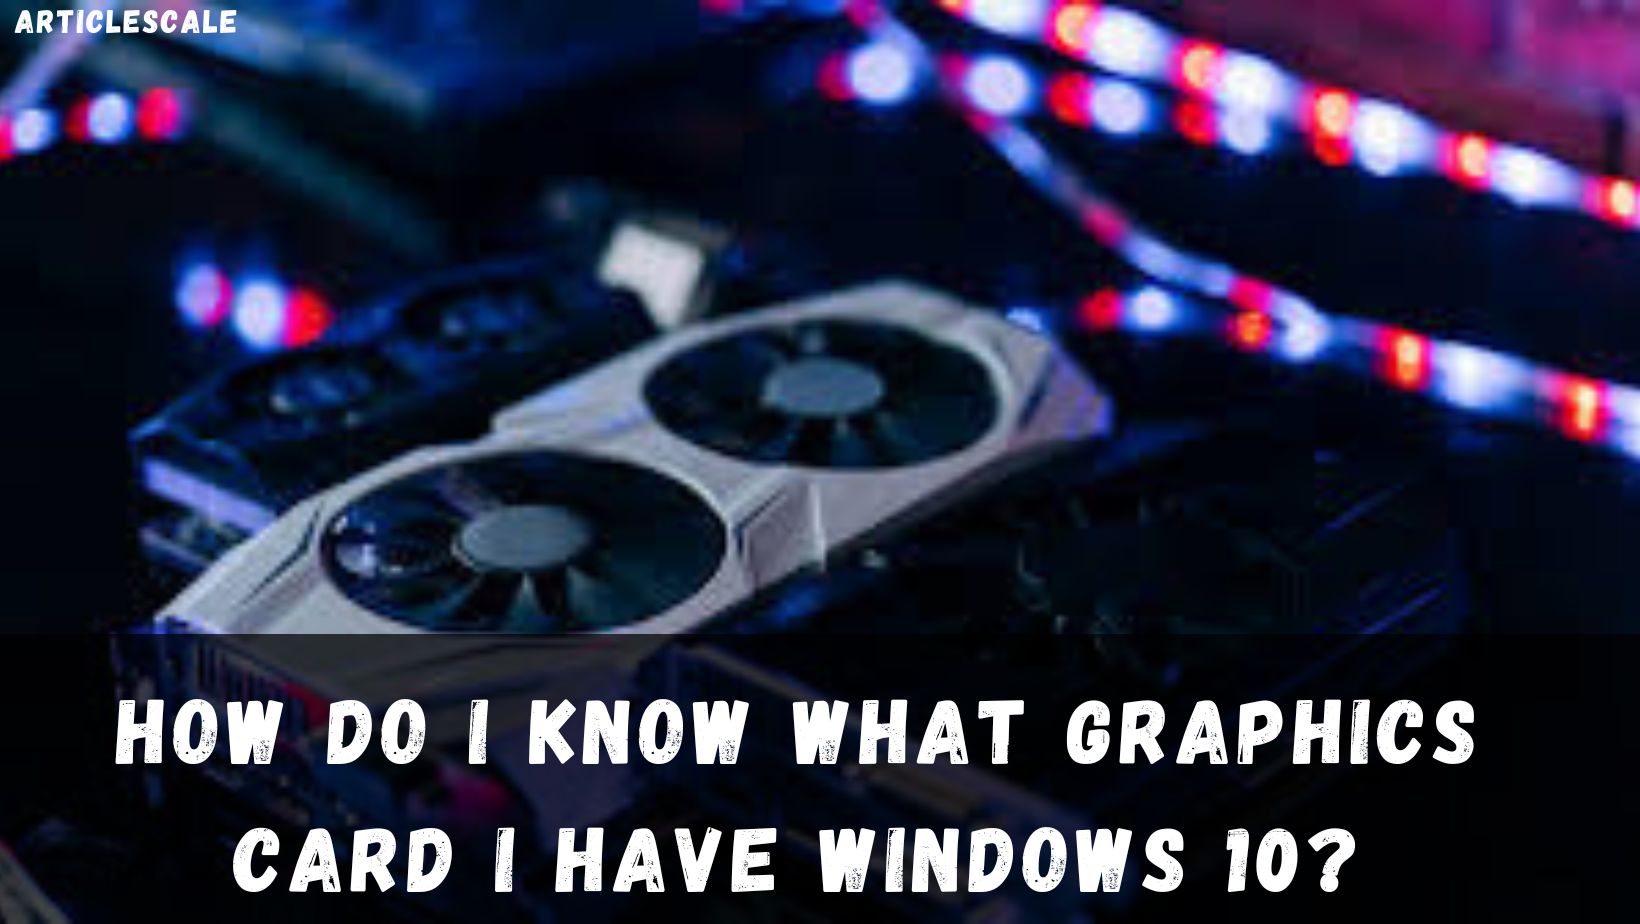 How Do I Know What Graphics Card I Have Windows 10?